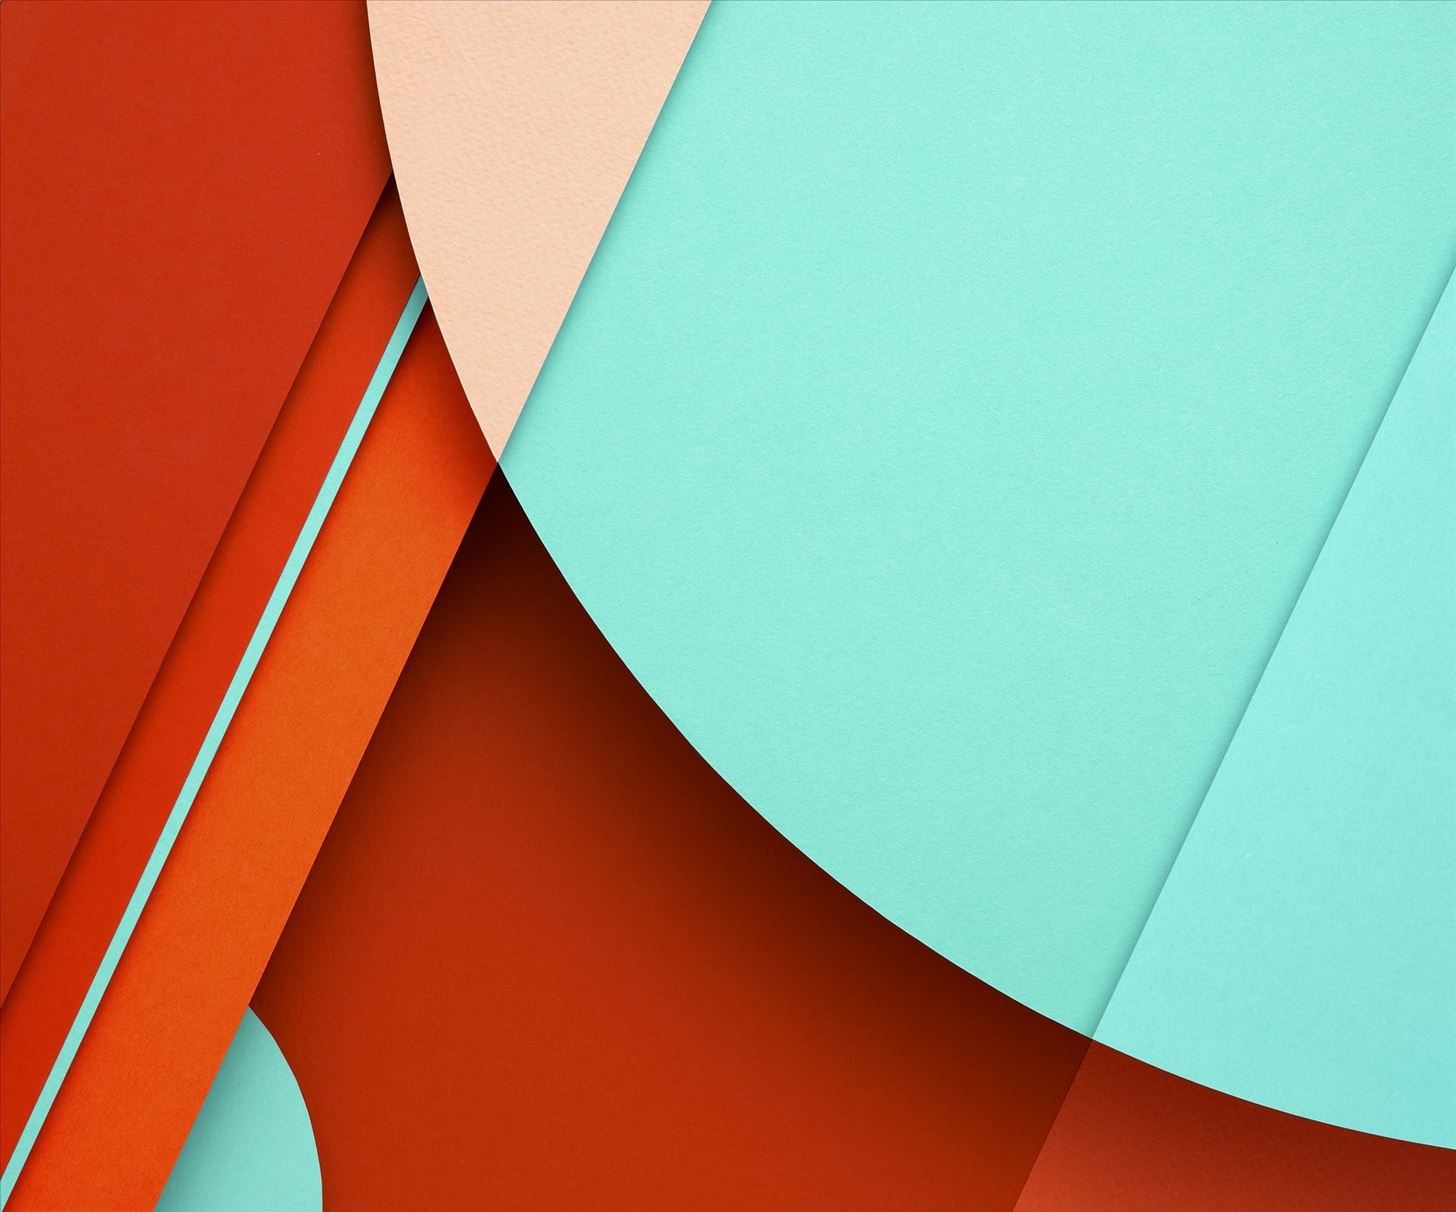 Download All the New Android Lollipop Wallpapers Right Now